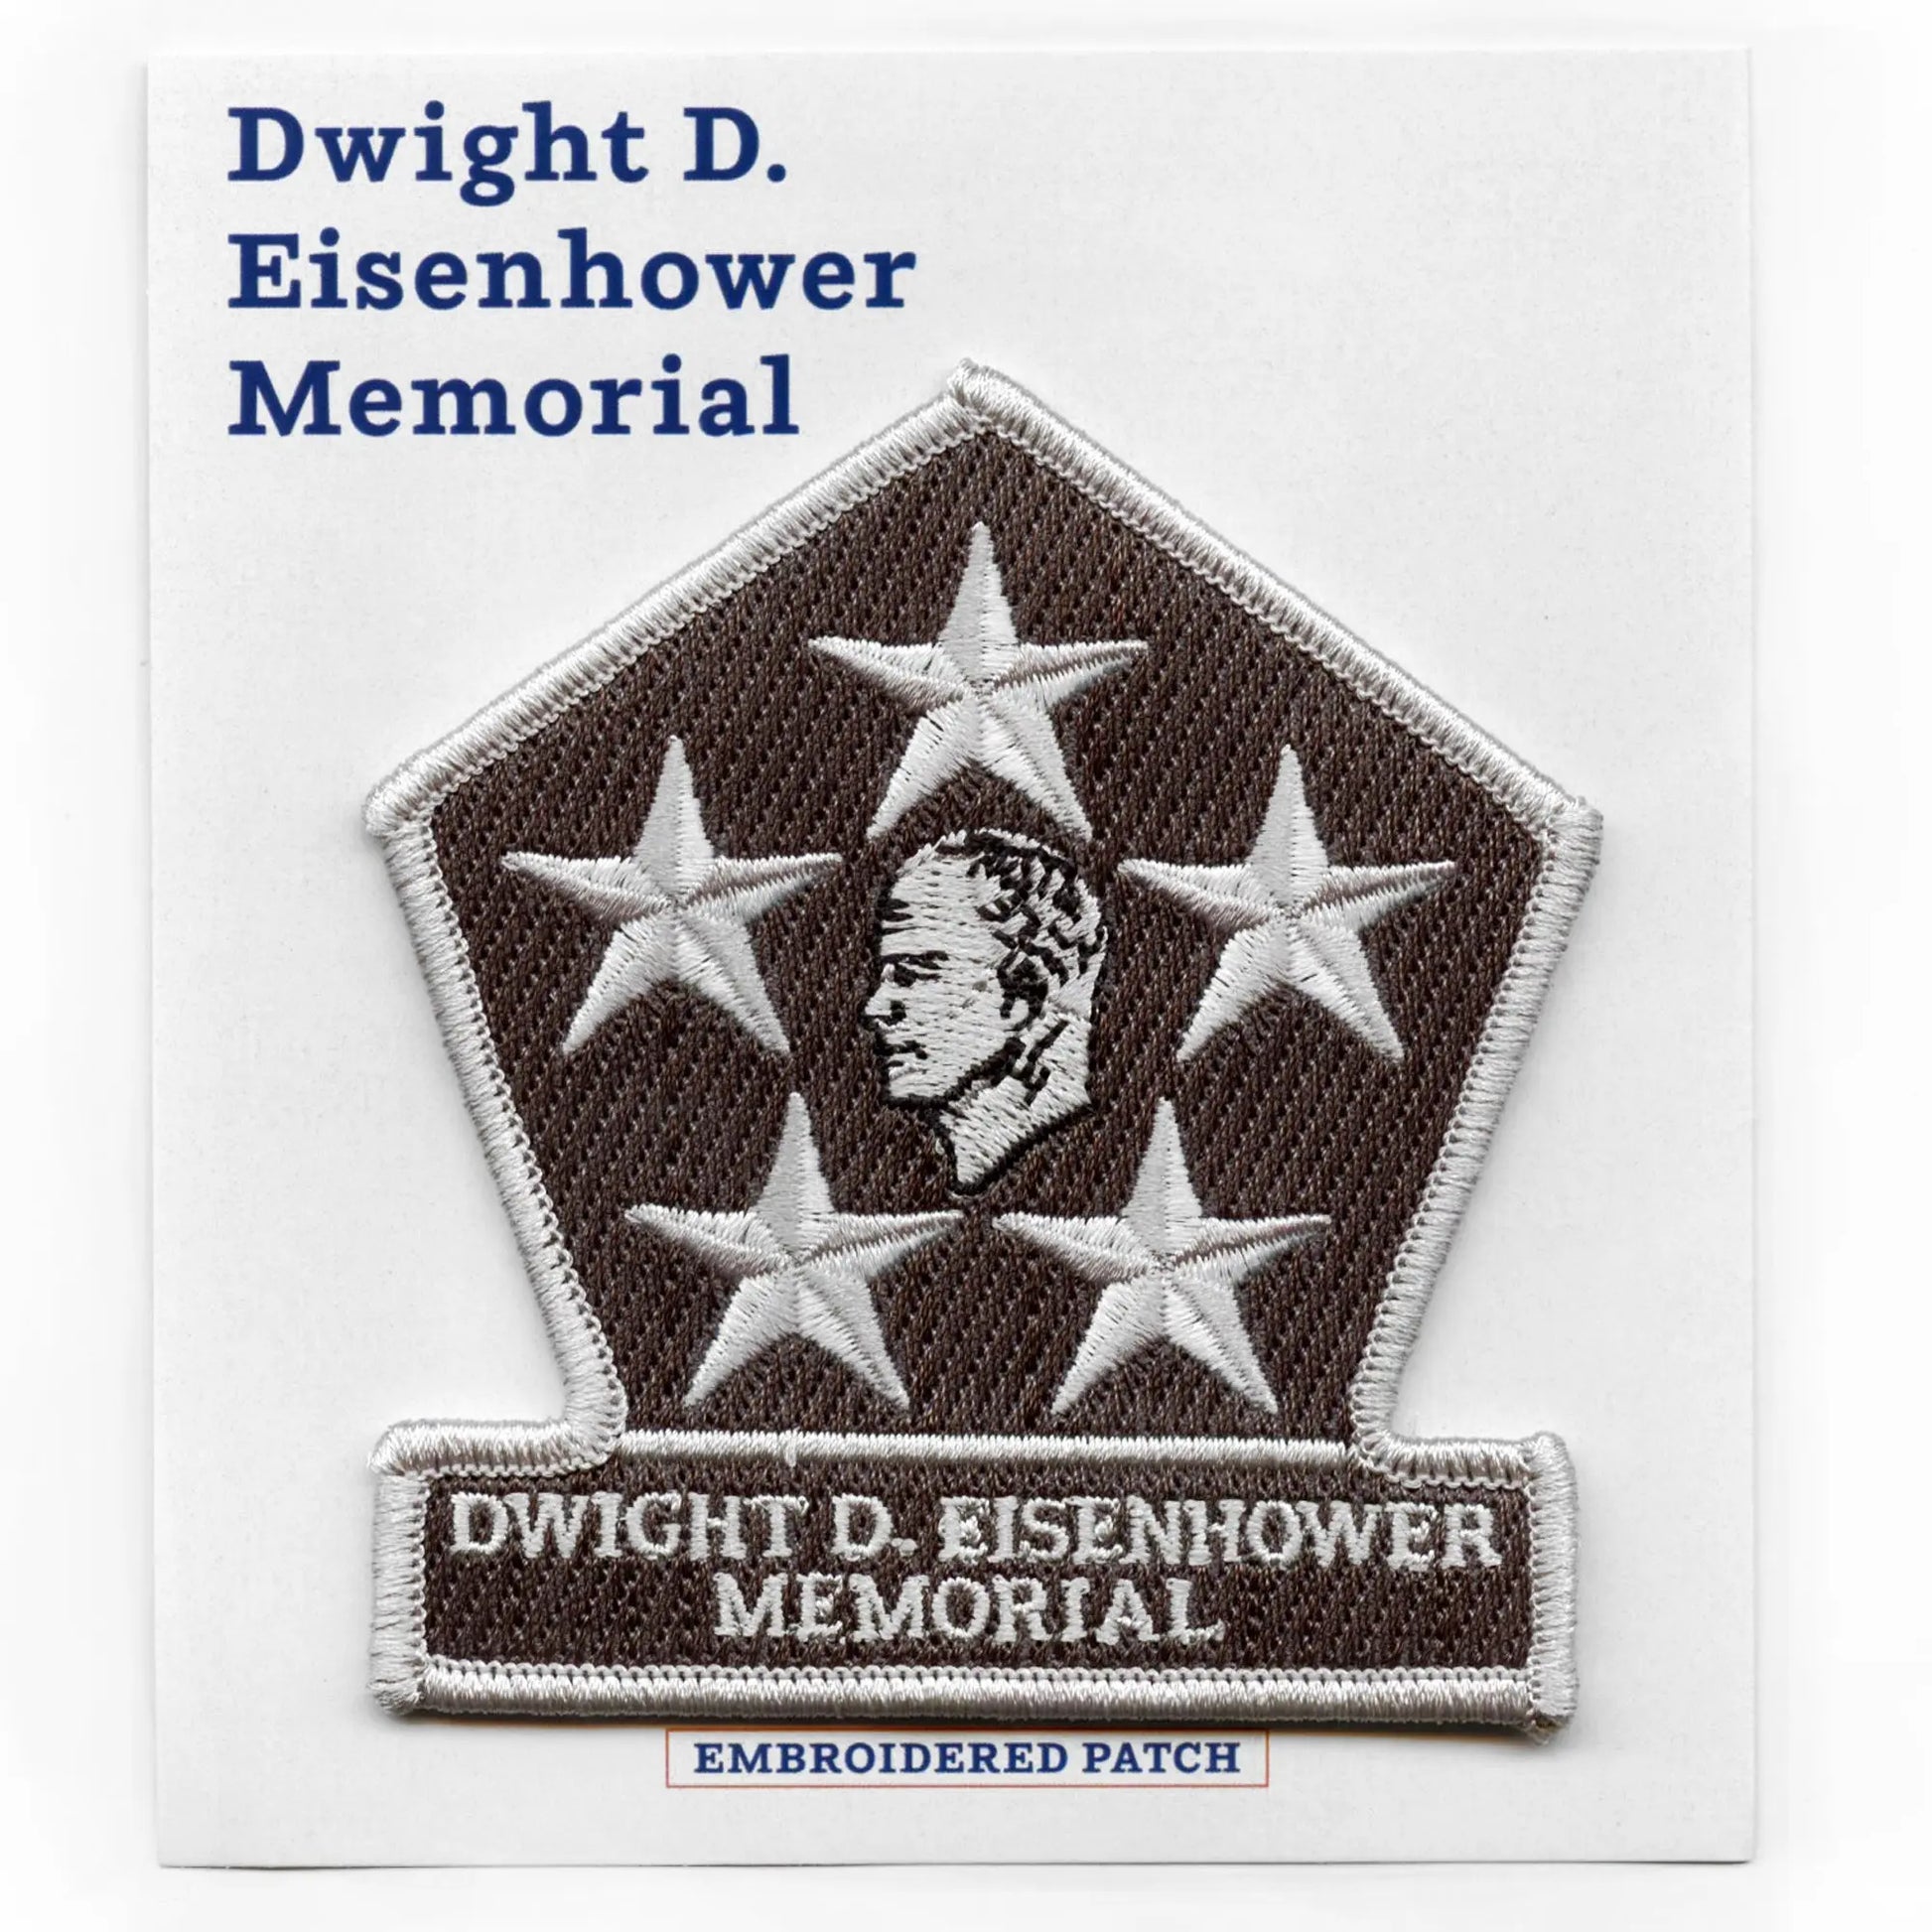 Dwight D. Eisenhower Memorial Patch Patch World War II Travel Embroidered Iron On